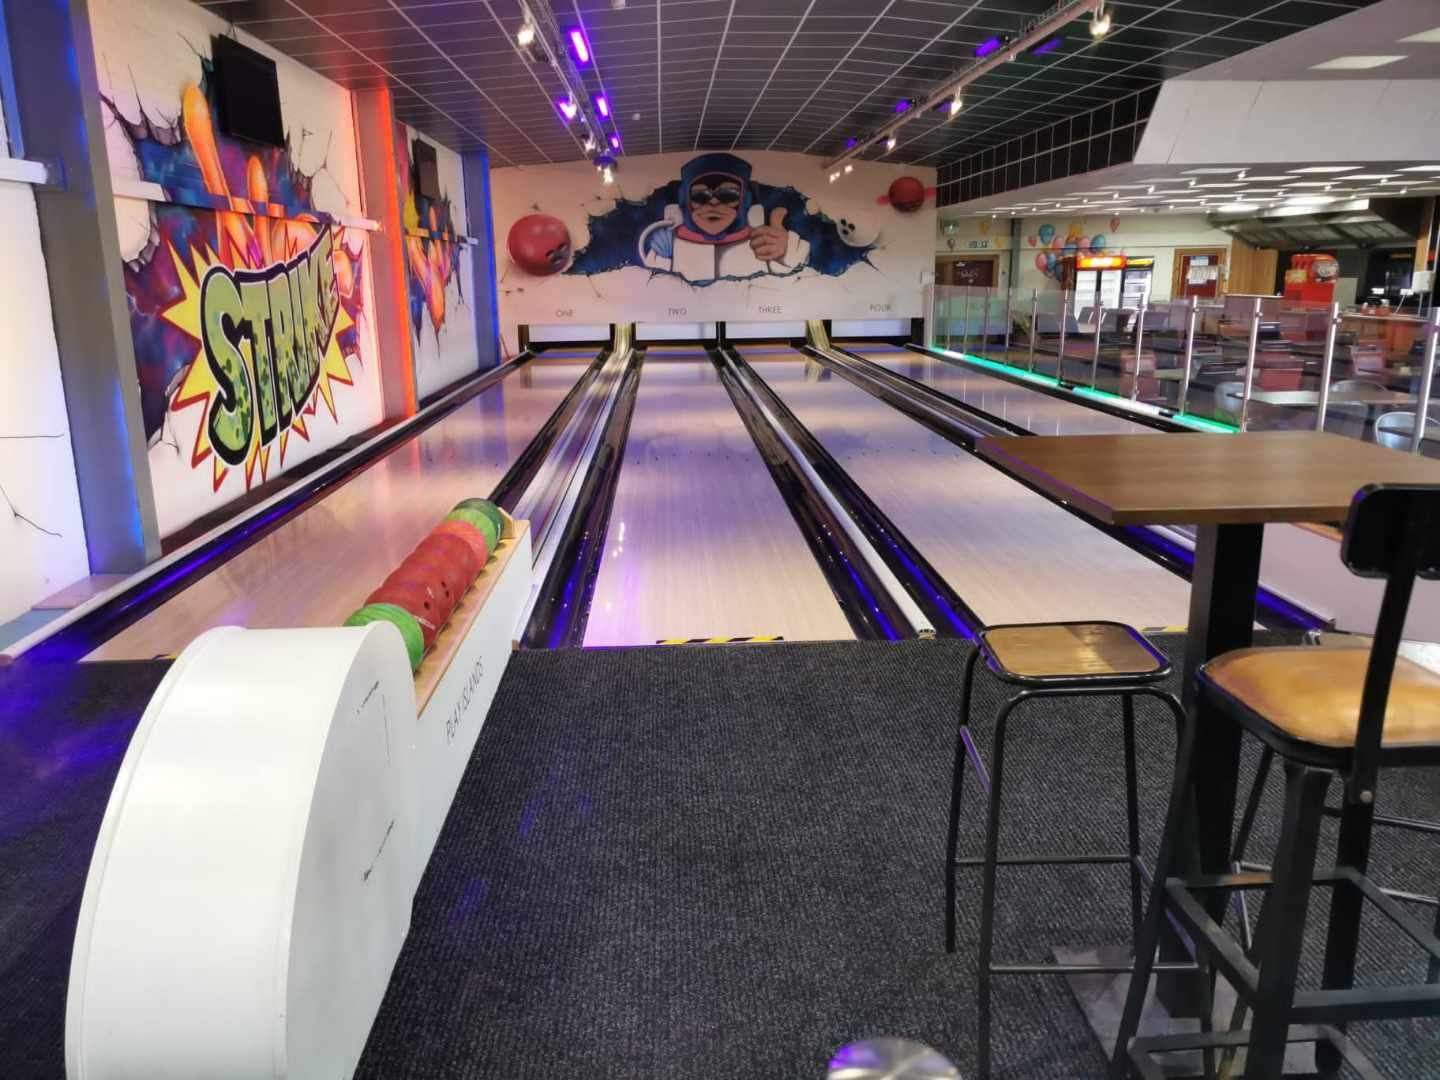 The 10-pin bowling alley has four lanes